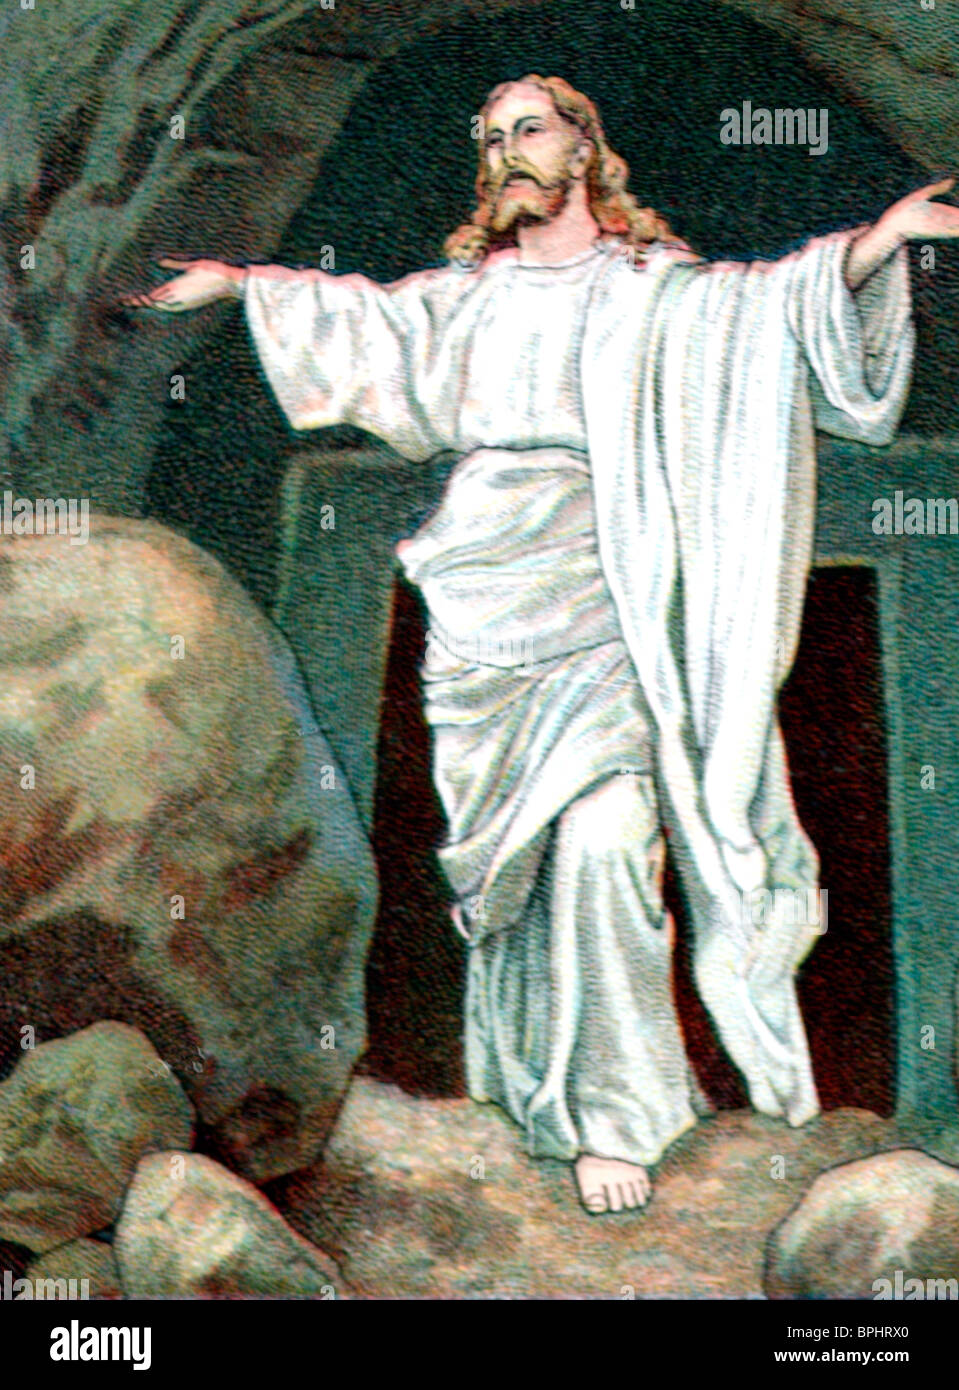 The resurrection of Jesus, or anastasis, the Christian belief that God raised Jesus on the third day after his crucifixion.  Old Sunday school garden of Jesus outside his rock tomb. Stock Photo